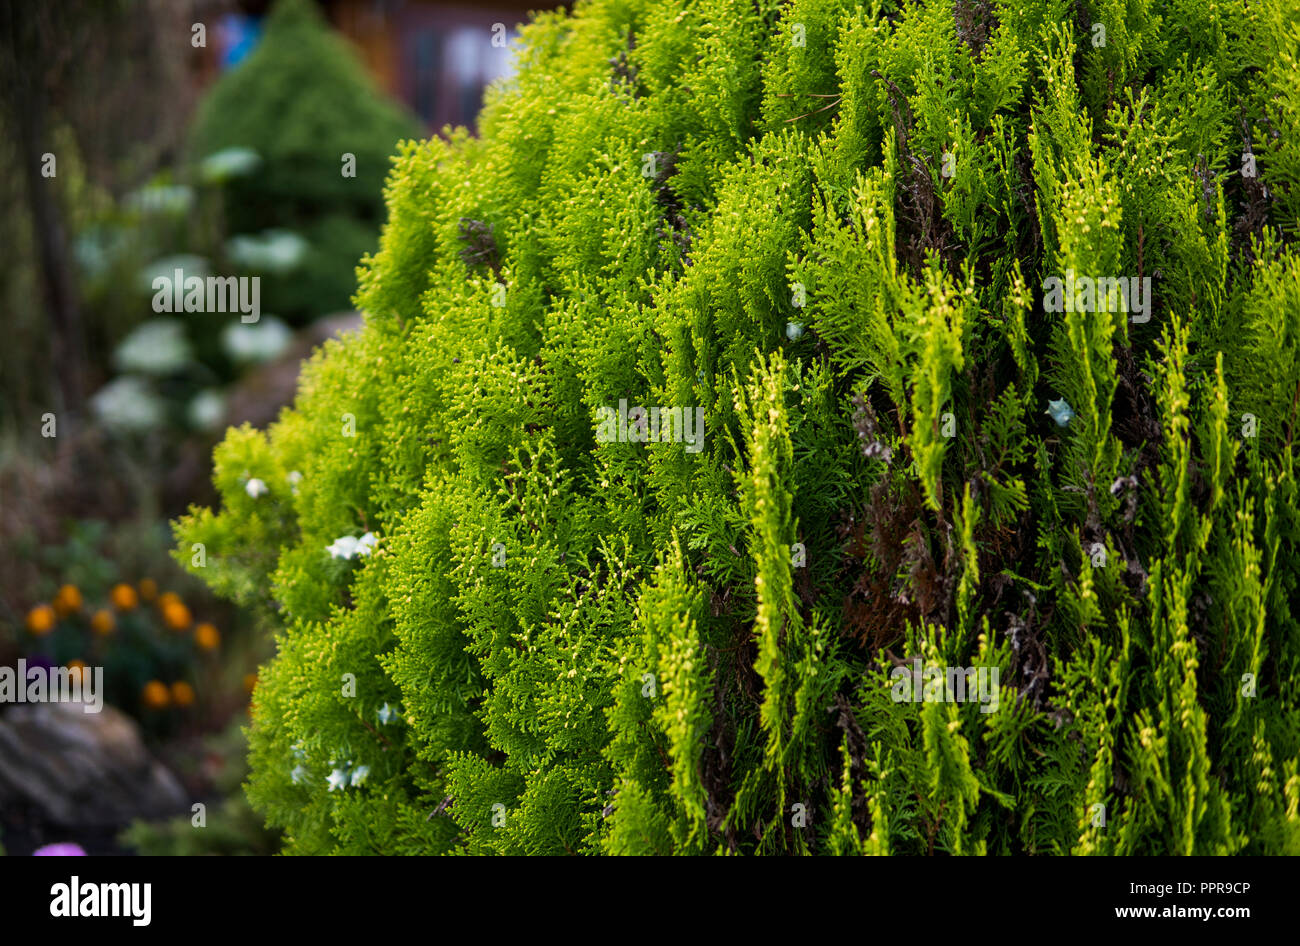 Green hedge of thuja trees. Green hedge of the tui tree. Nature, background. Stock Photo